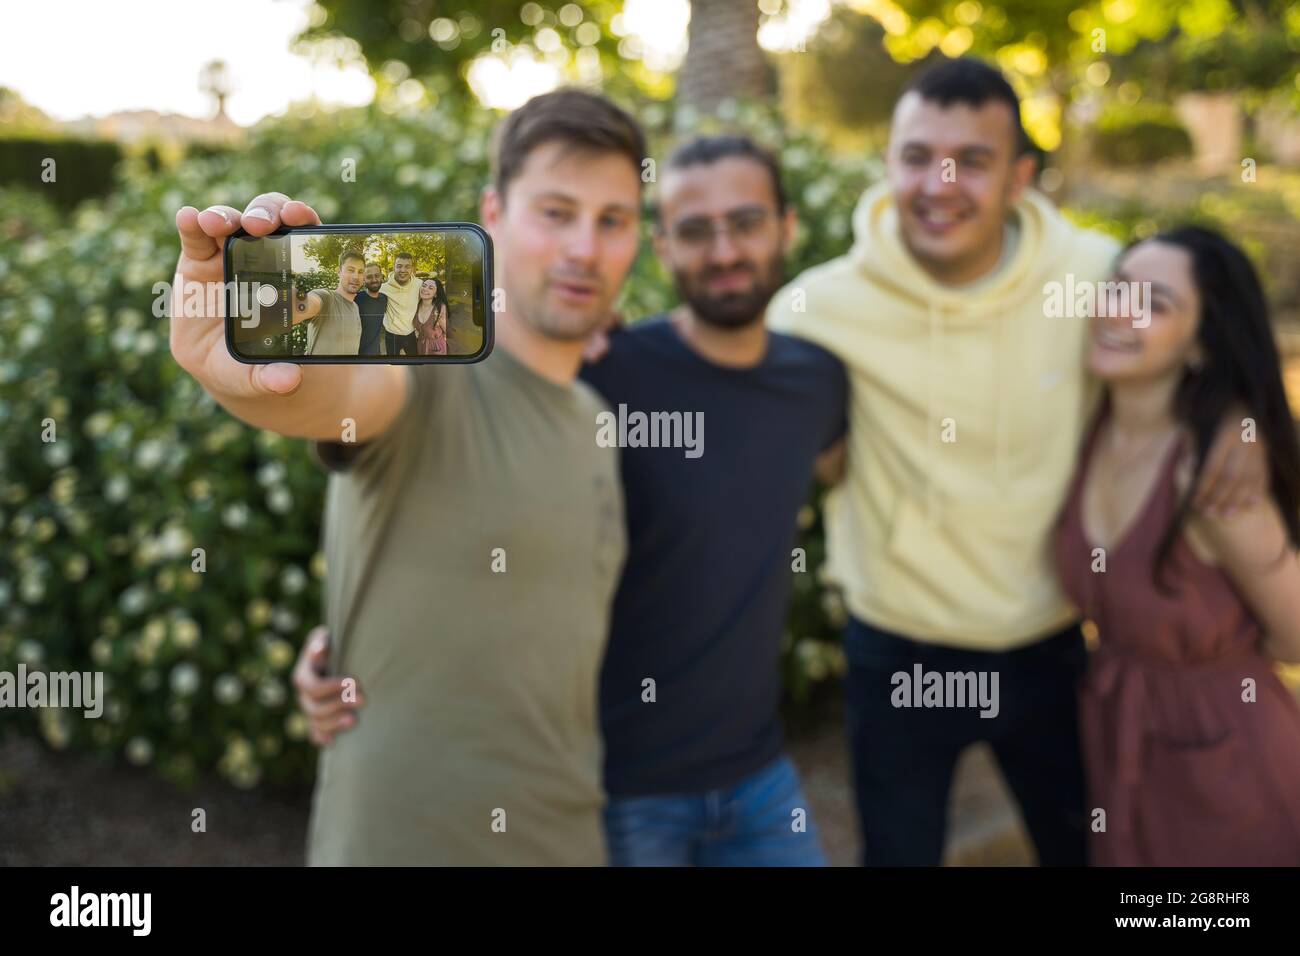 Friends taking a selfie together in the park. Caucasians in colourful clothes. They are happy taking a photo. The focus is on the mobile phone. Javea, Stock Photo